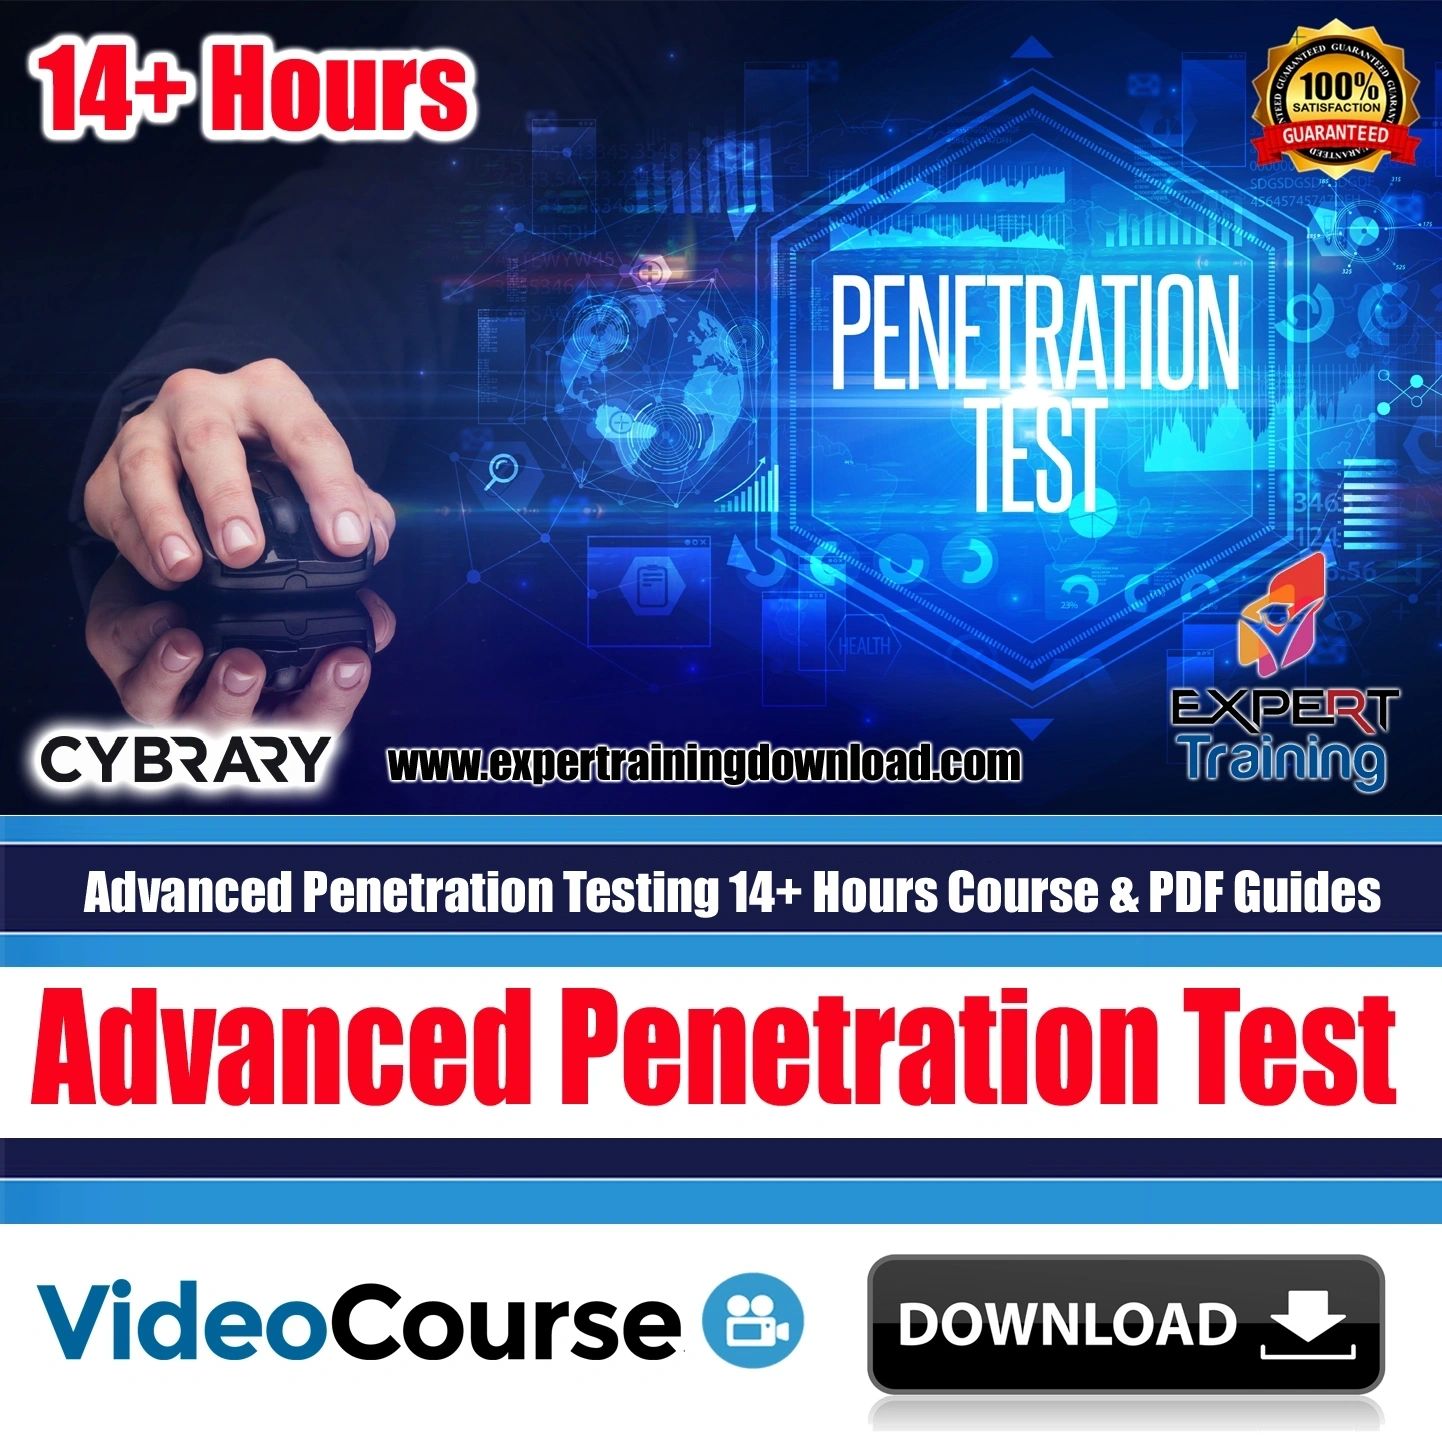 Advanced Penetration Testing 14+ Hours Course & PDF Guides